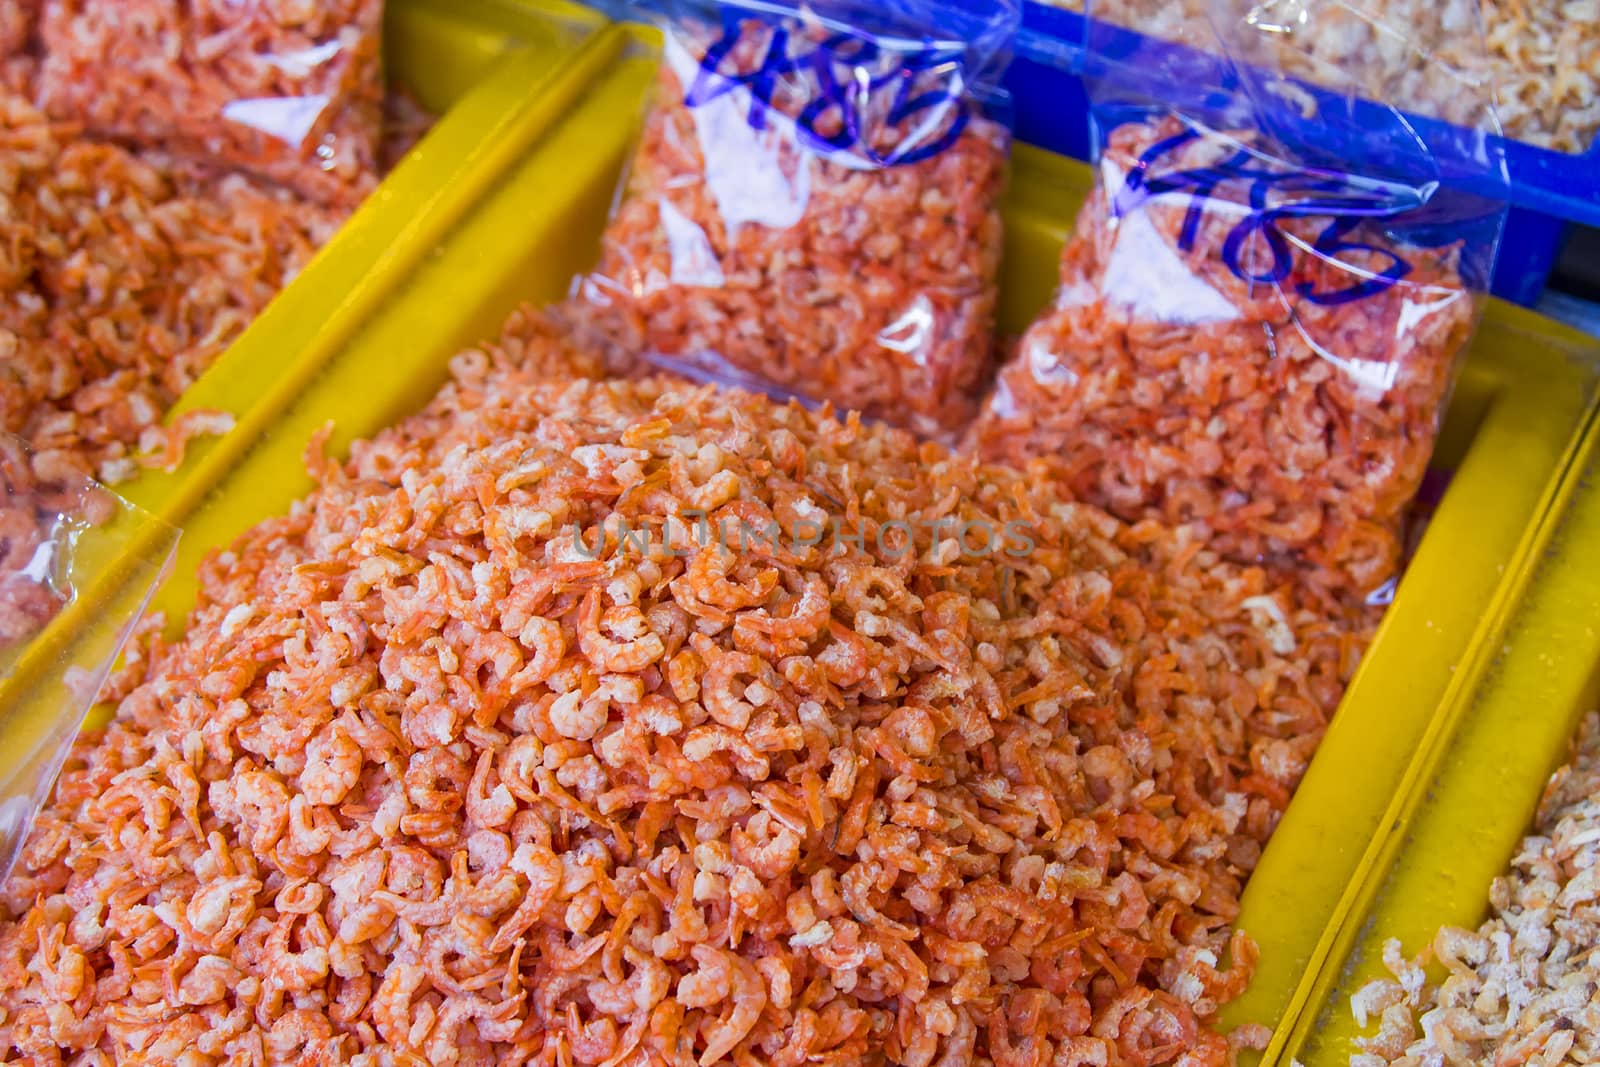 Dried shrimps of fresh orange is in the yellow pickup.